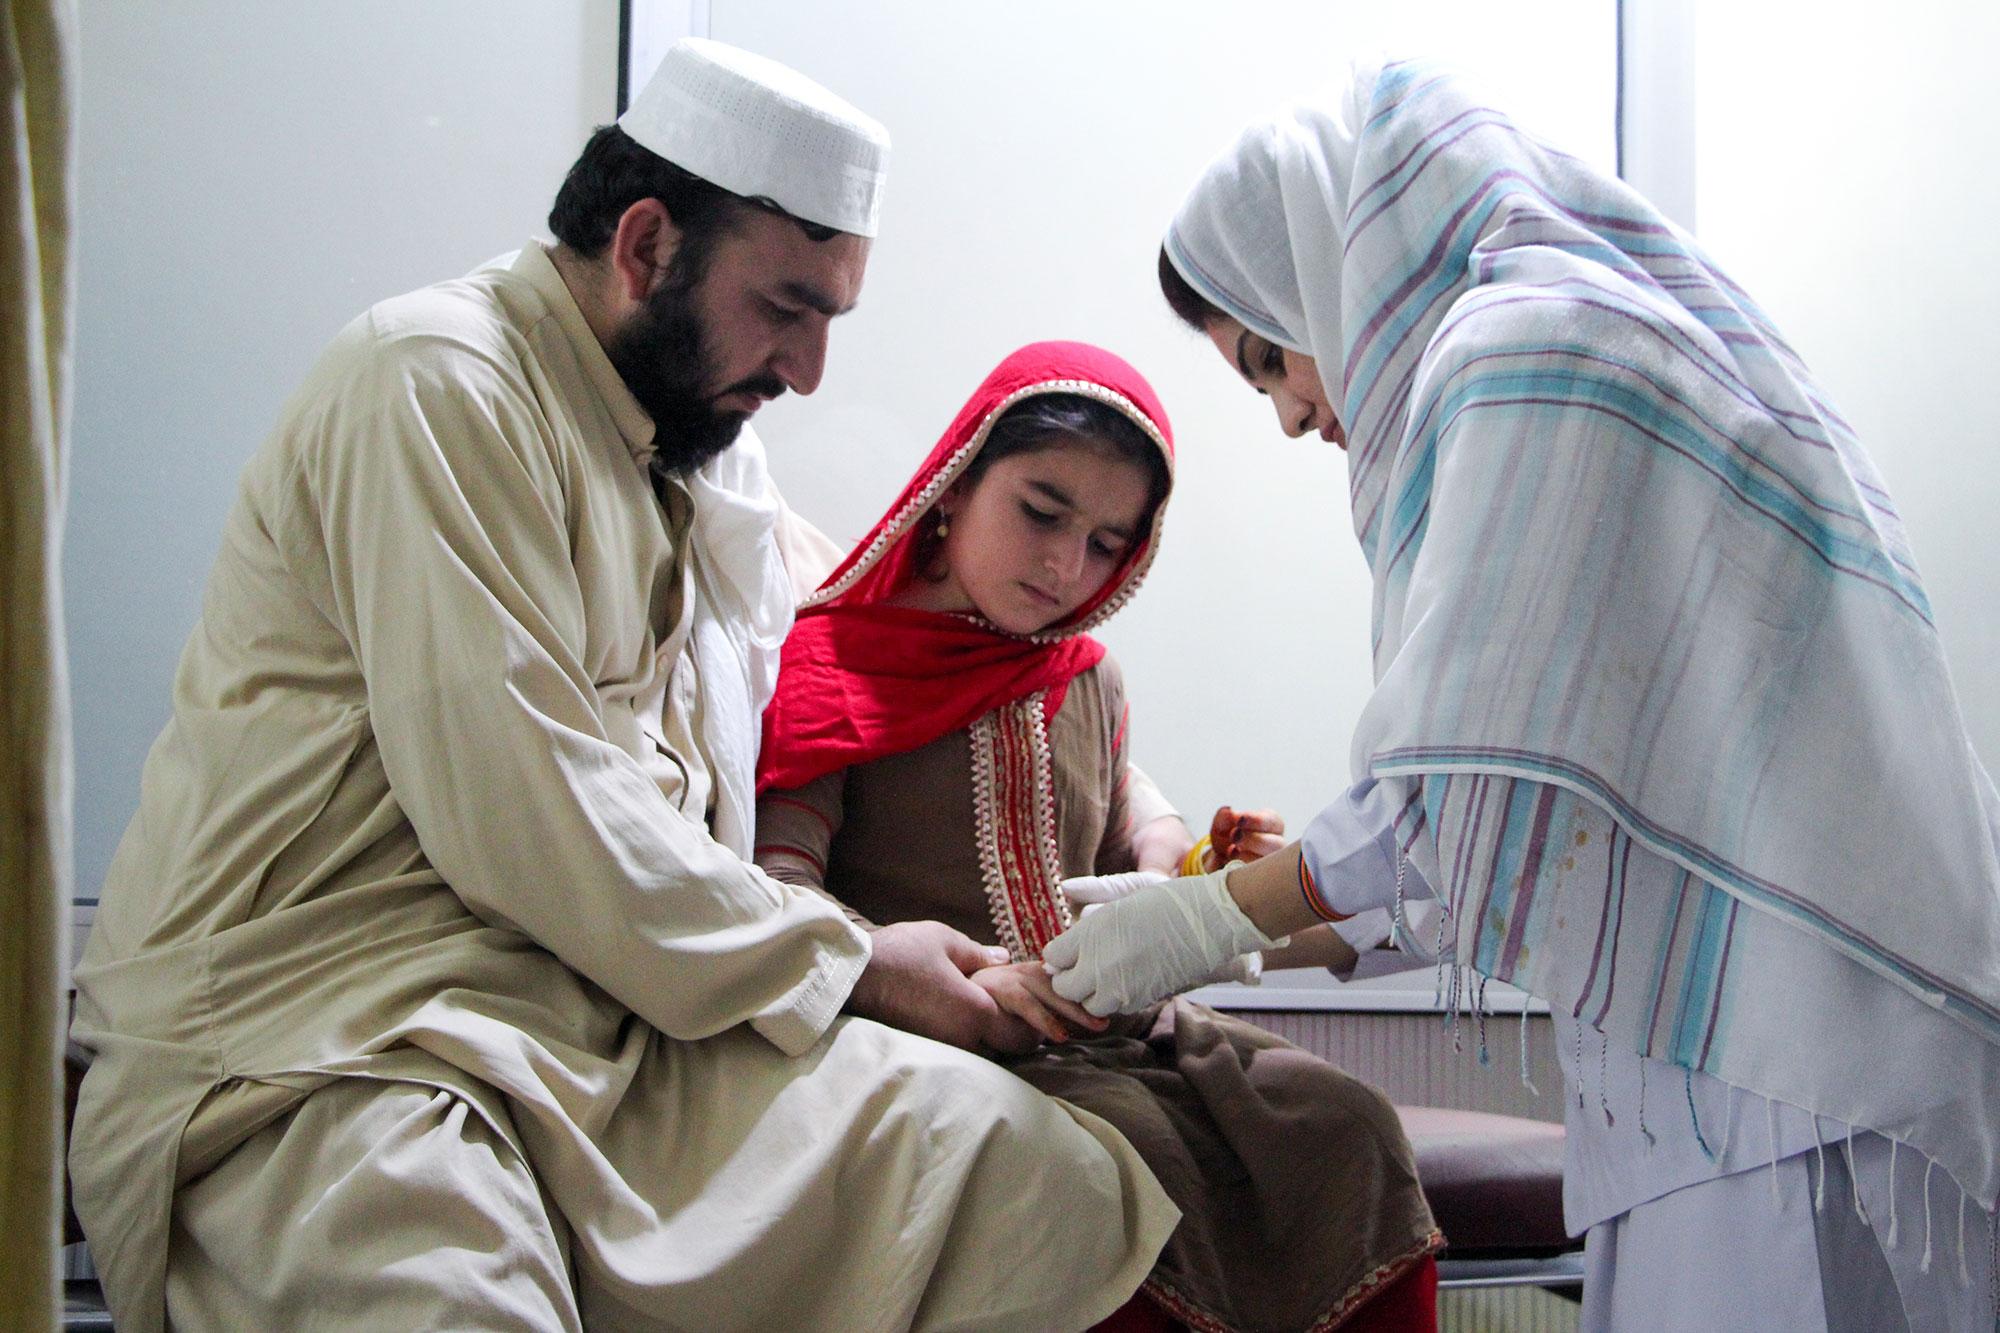 Subhan calms his daughter Afia as she receives injection for cutaneous leishmaniasis lesion at the MSF treatment centre in Naseerullah Khan Babar Memorial hospital, Peshawar.